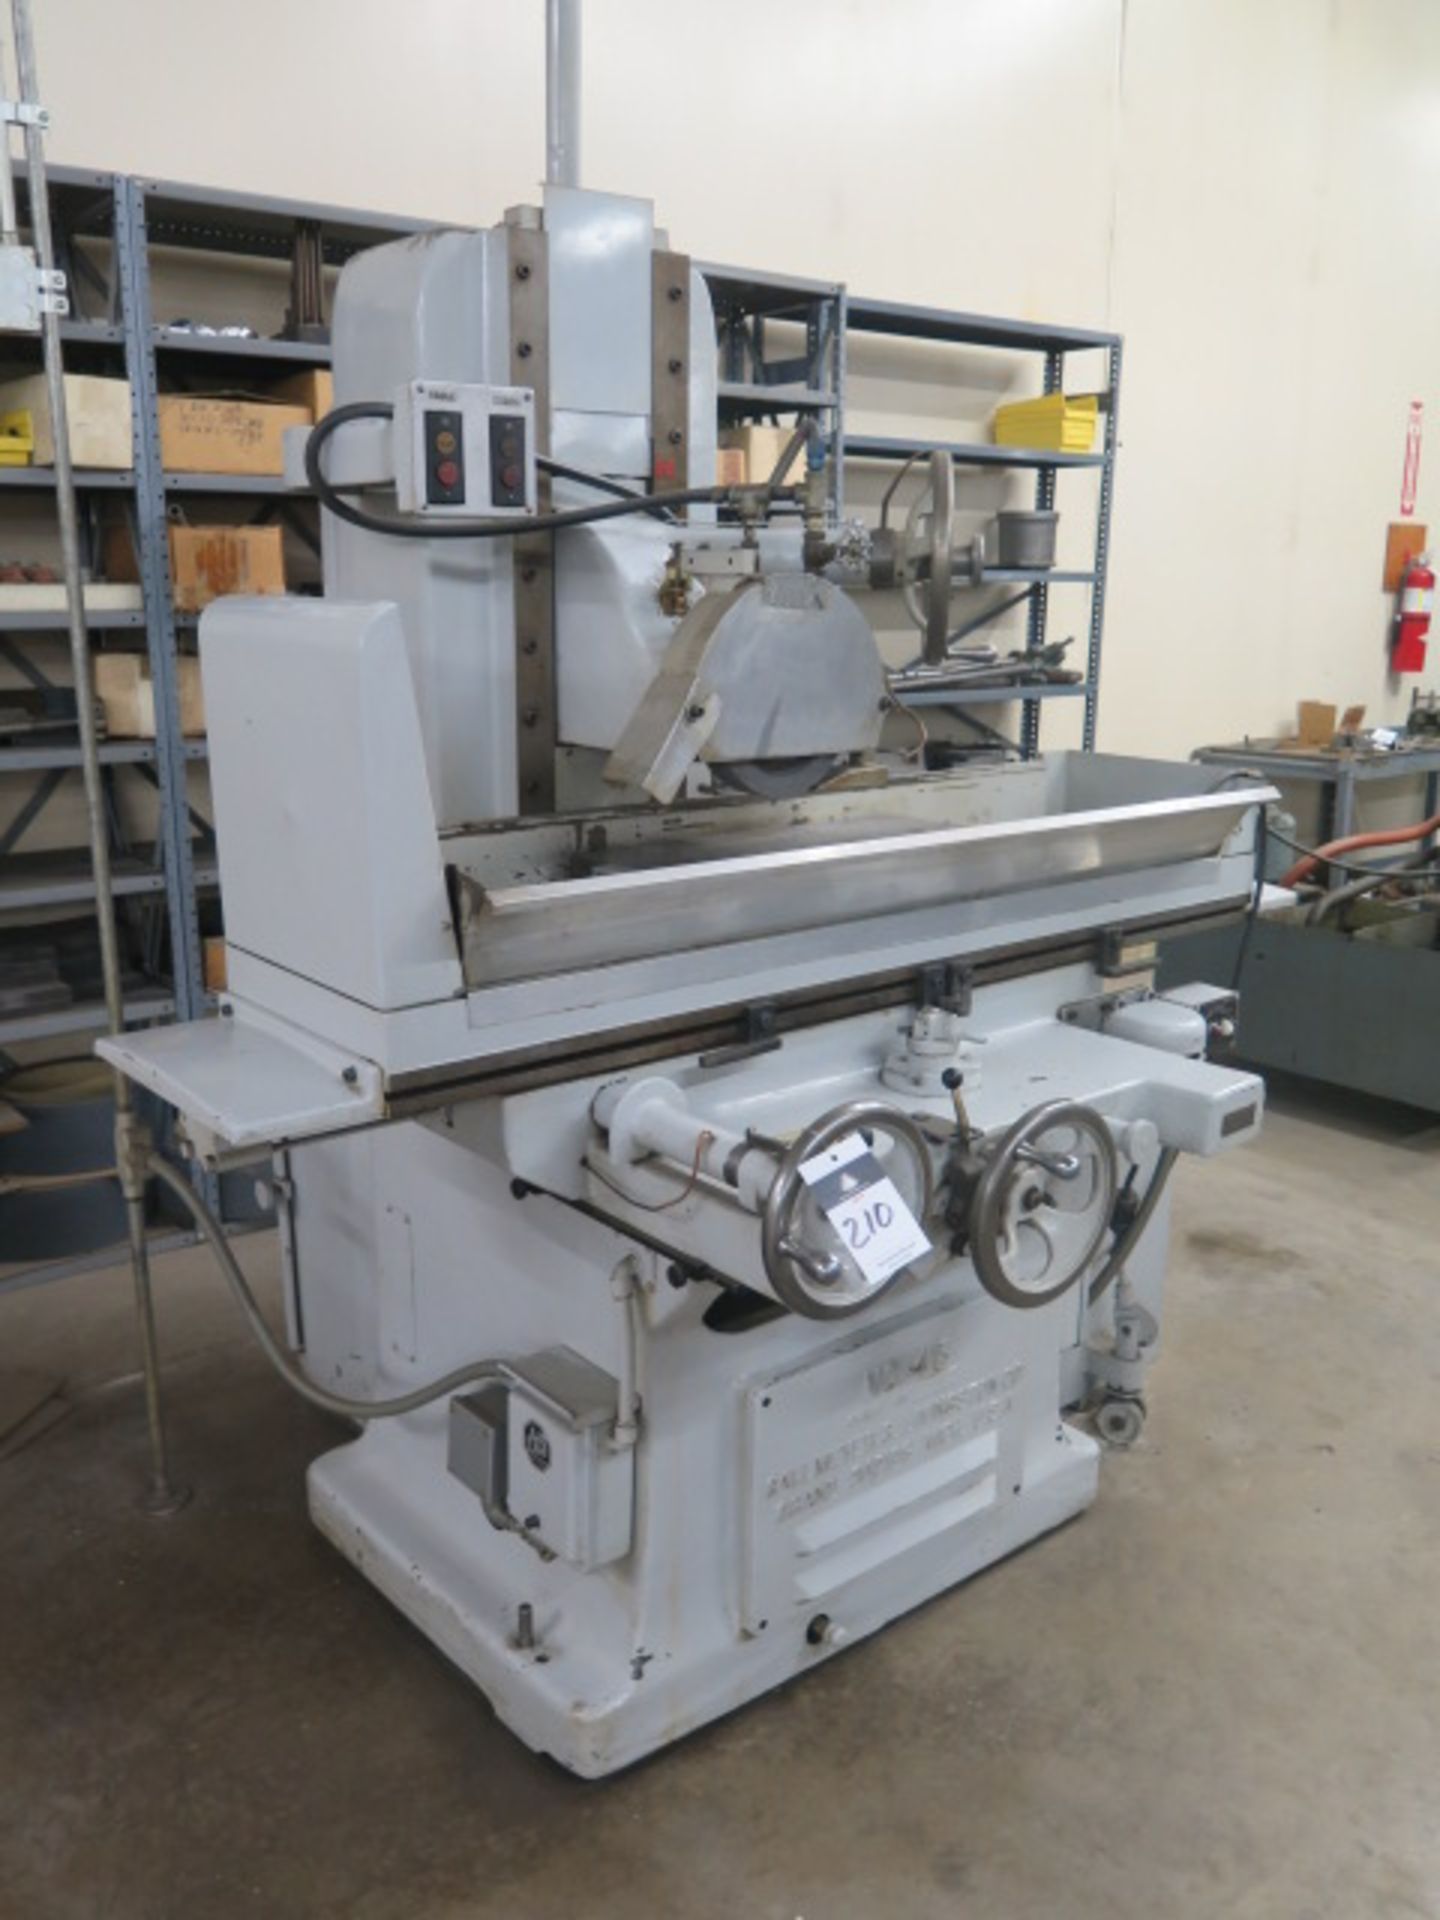 Gallmeyer & Livingston No. 45 12” x 24” Automatic Surface Grinder w/Electromagnetic Chuck, Coolant - Image 3 of 10